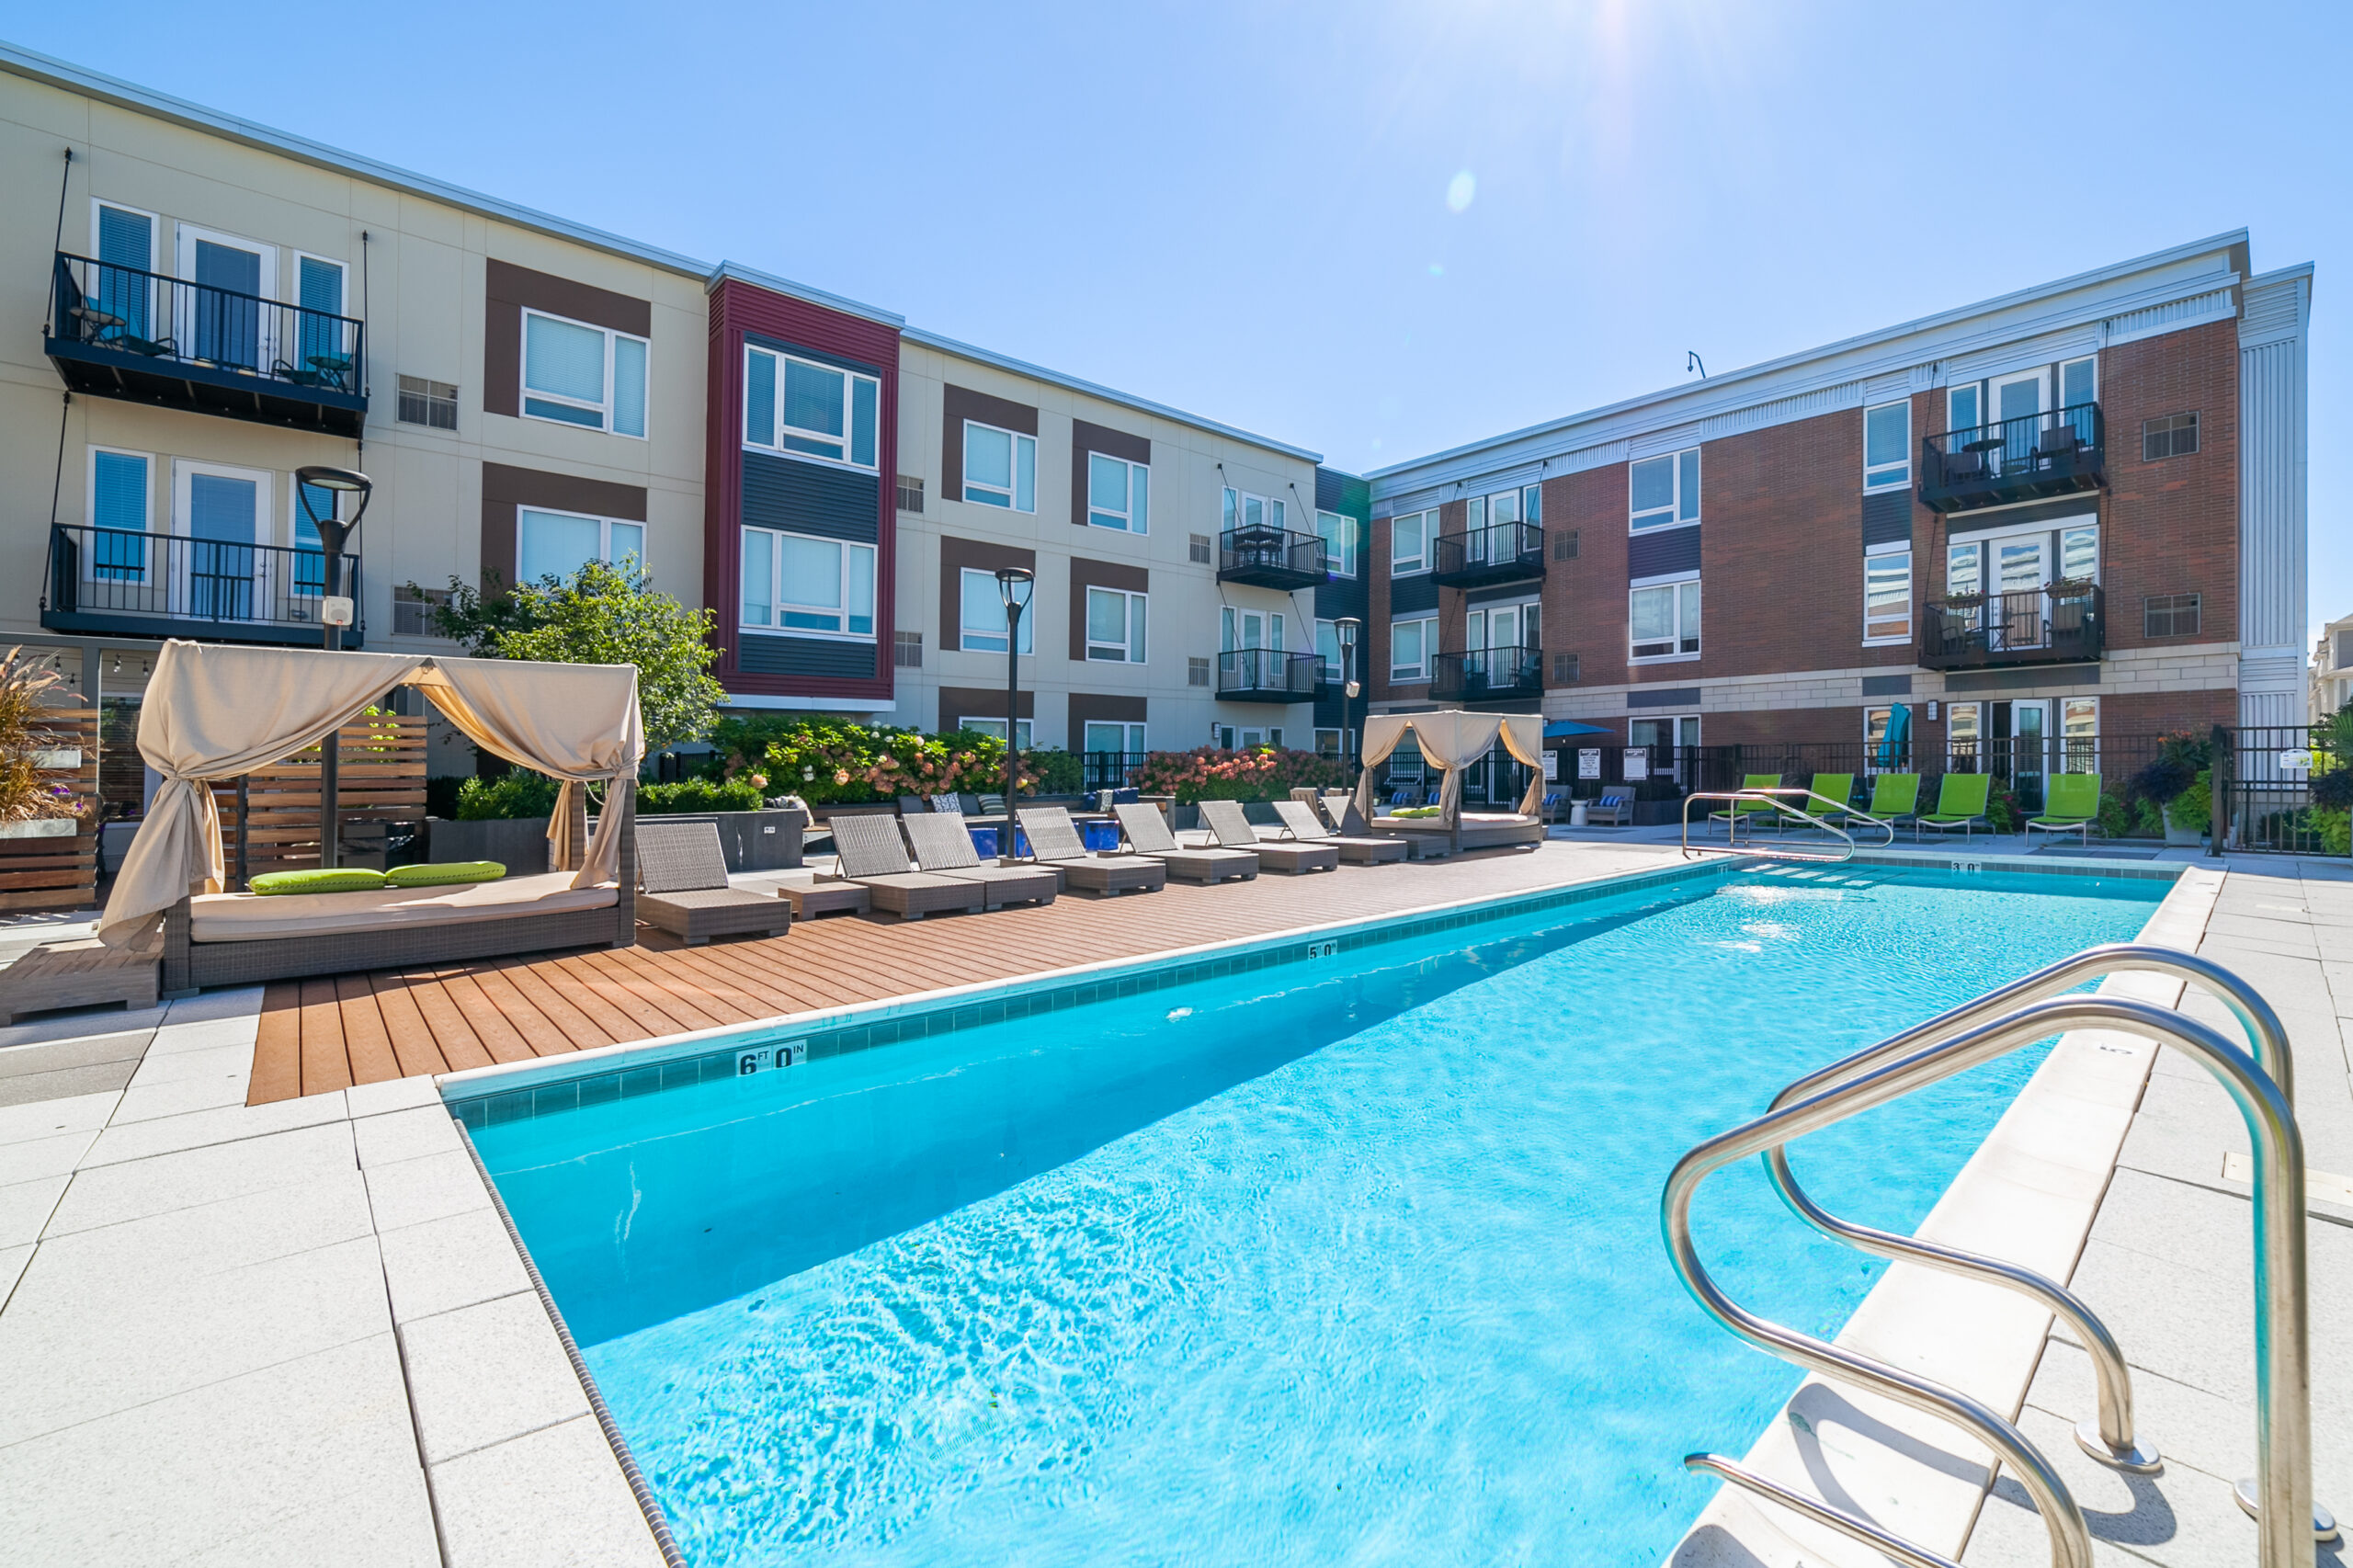 Trilogy Real Estate Group Subscribes DST Offering of Multifamily Property Near Chicago